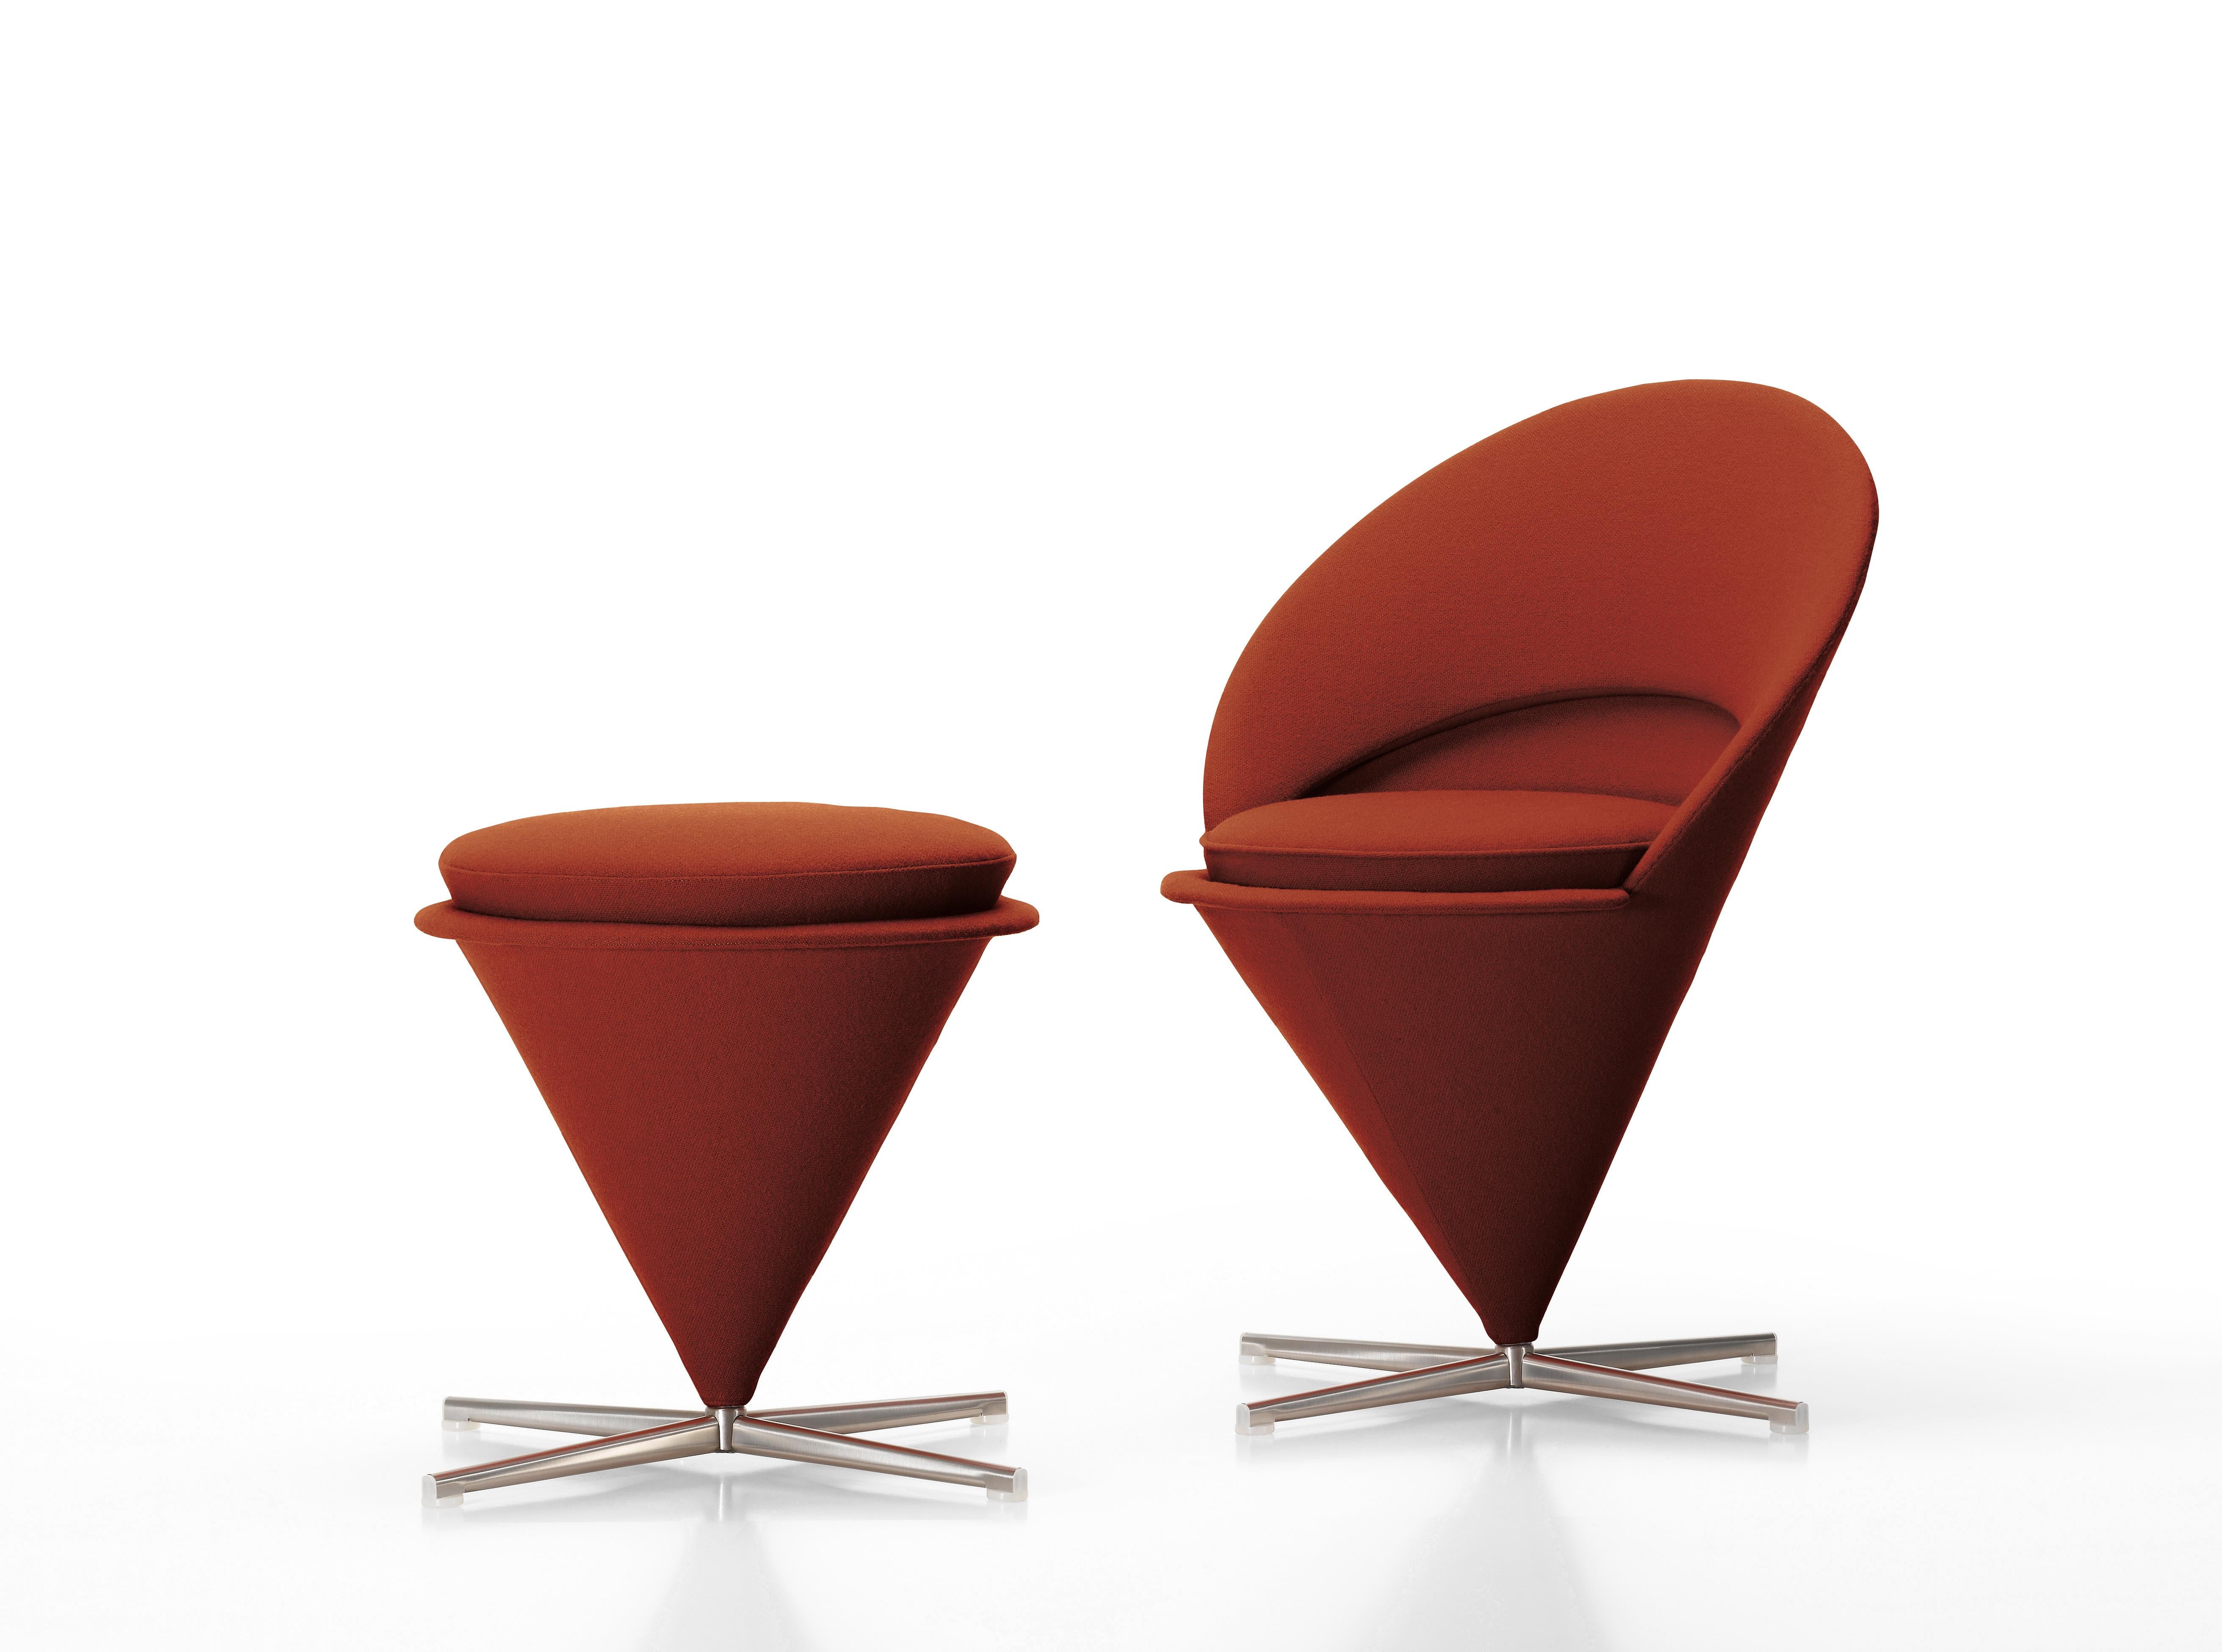 These items are currently only available in the United States.

Originally designed for a Danish restaurant, the cone chair takes its shape from the classic geometric figure for which it is named. The cone-shaped seat is mounted at its point on a